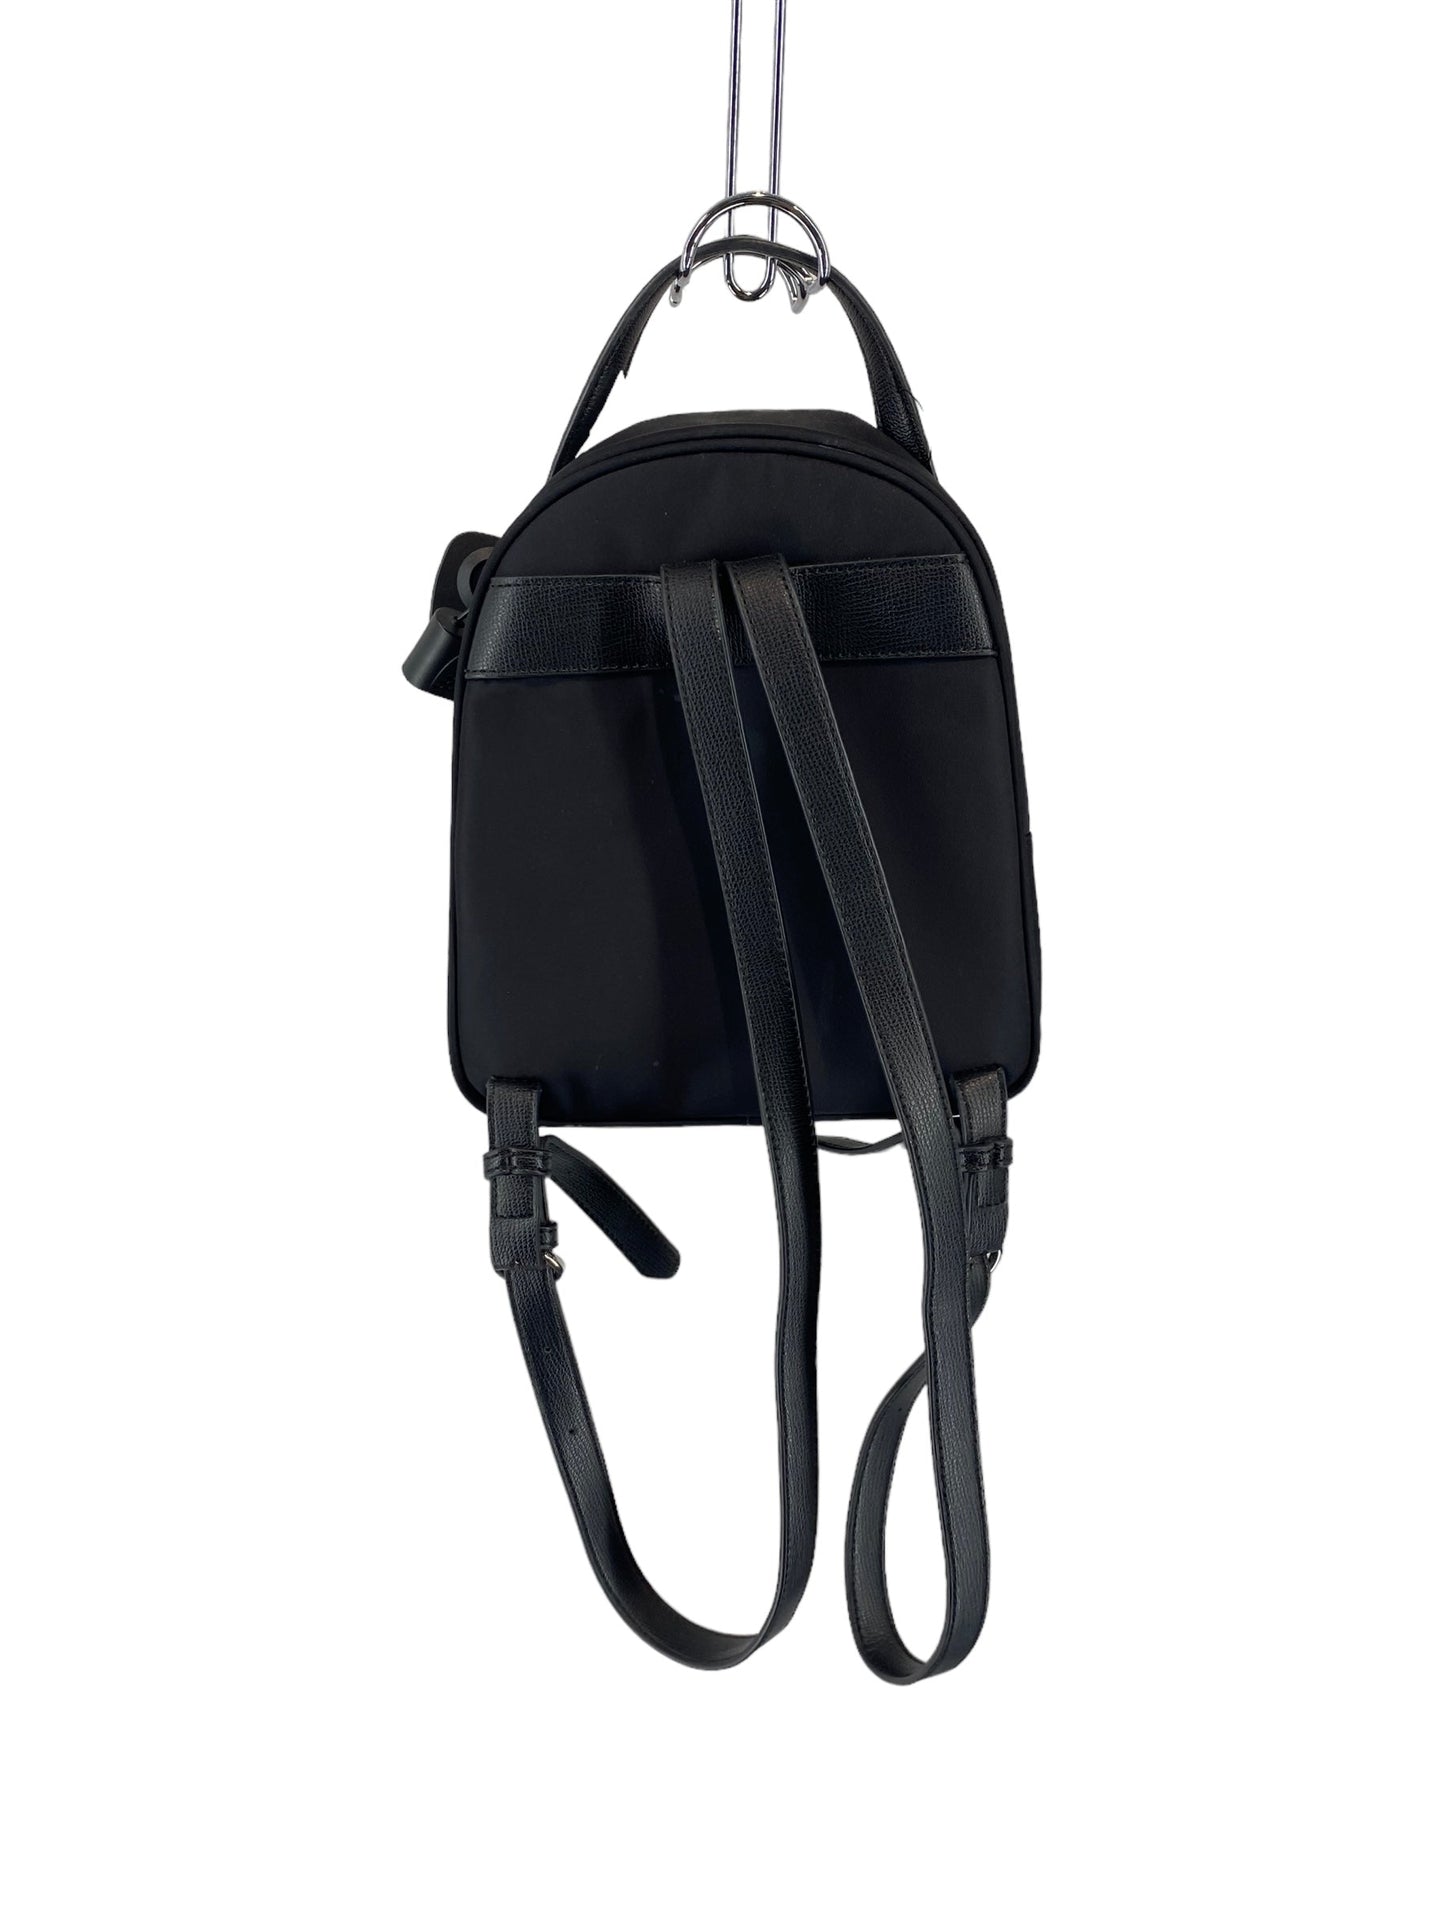 Backpack Designer By Karl Lagerfeld  Size: Small